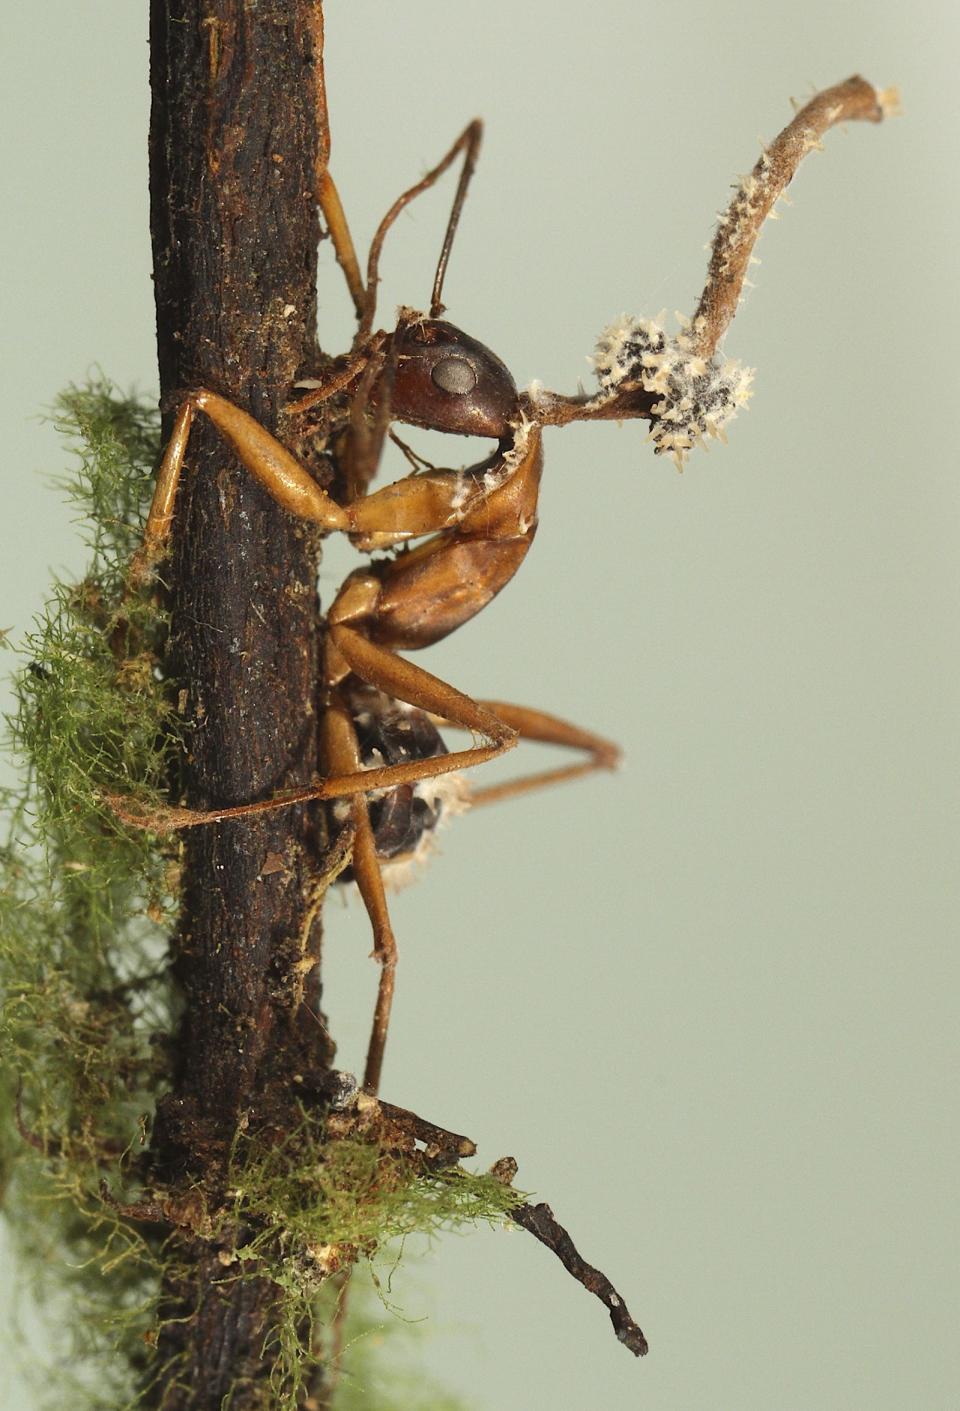 An Ophiocordyceps species of fungi has exploded from the body of a carpenter ant in Japan to scatter spores that can infect other ants. In the tropics, the fungi make the infected ants leave their nest, climb a plant and bite down on a plant leaf. Farther north where leaves fall, the ants are driven to hug twigs instead. [João Araújo via The New York Times]